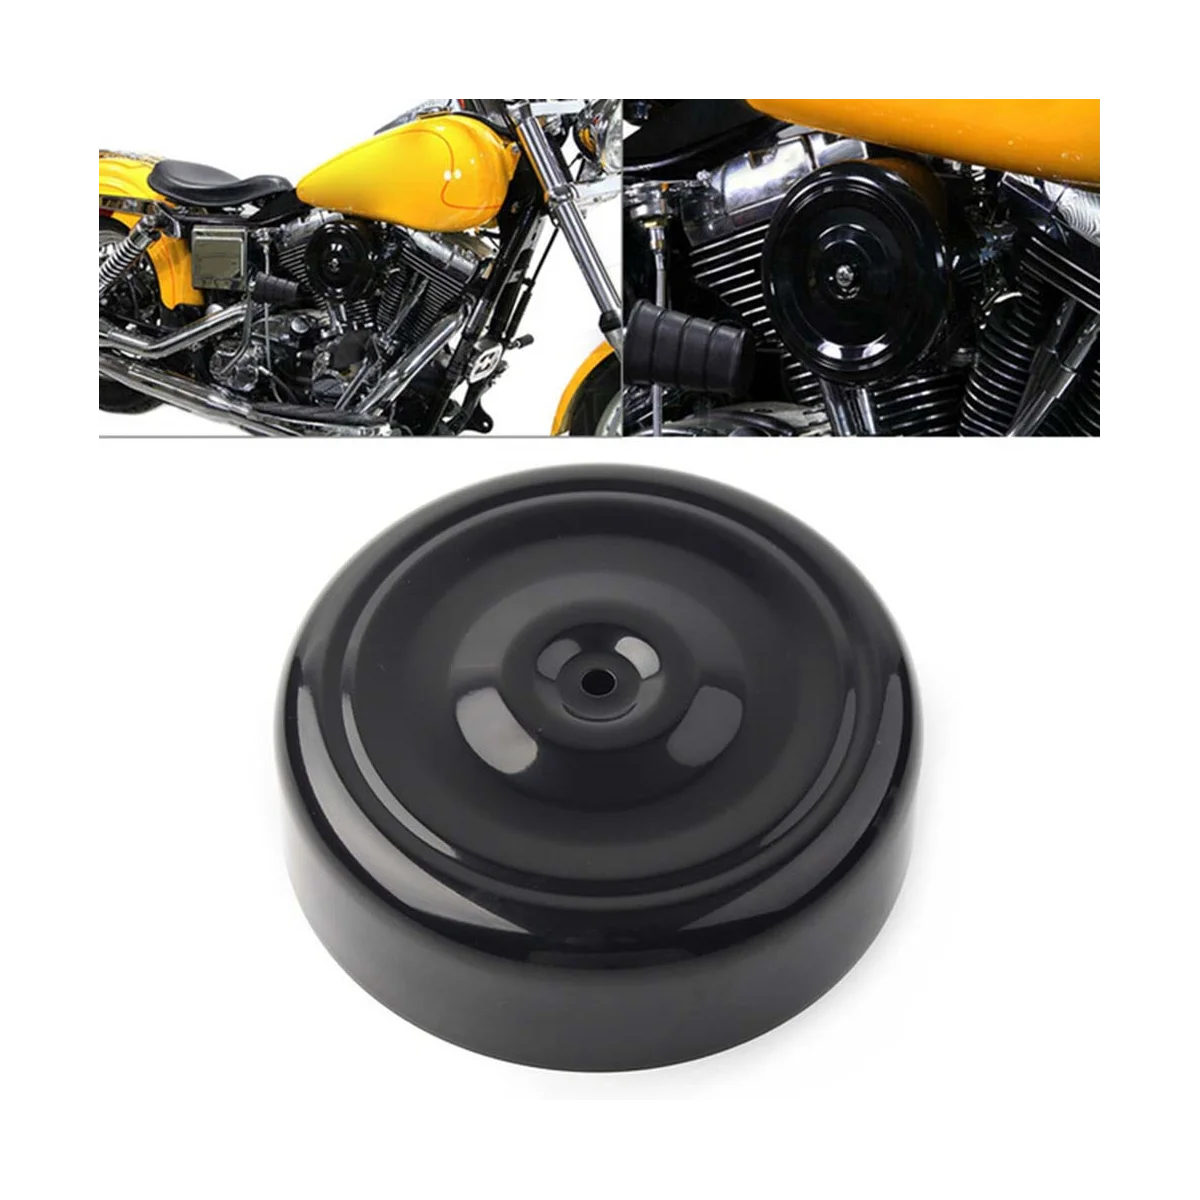 

Black 7Inch Air Cleaner Cover for Harley Touring Softail Dyna FL FX FXST FLST FXR XL FXD FLT Motorcycle Round Ripple